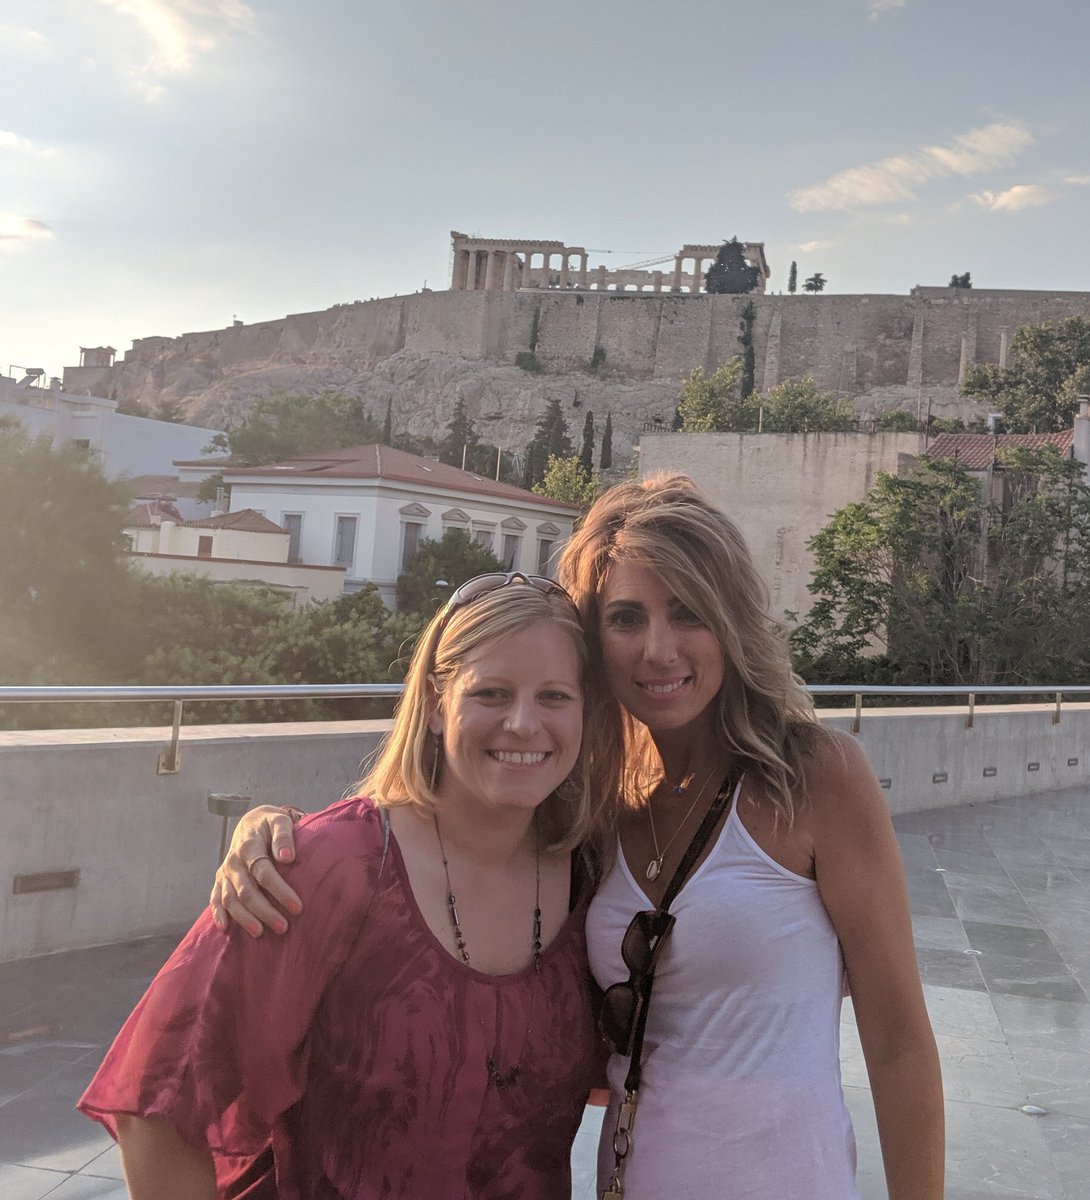 Had the privilege to hang out with this amazing human in Athens! @APappaILD is the founder and CEO of the #ILoveDyslexia School for EFL students with dyslexia. Can't wait to visit her school next week!🇸🇪☺️#Neurodiversity #3Dlexia @NDDPI @ontheBalledu @NEAFoundation @TeacherPrize